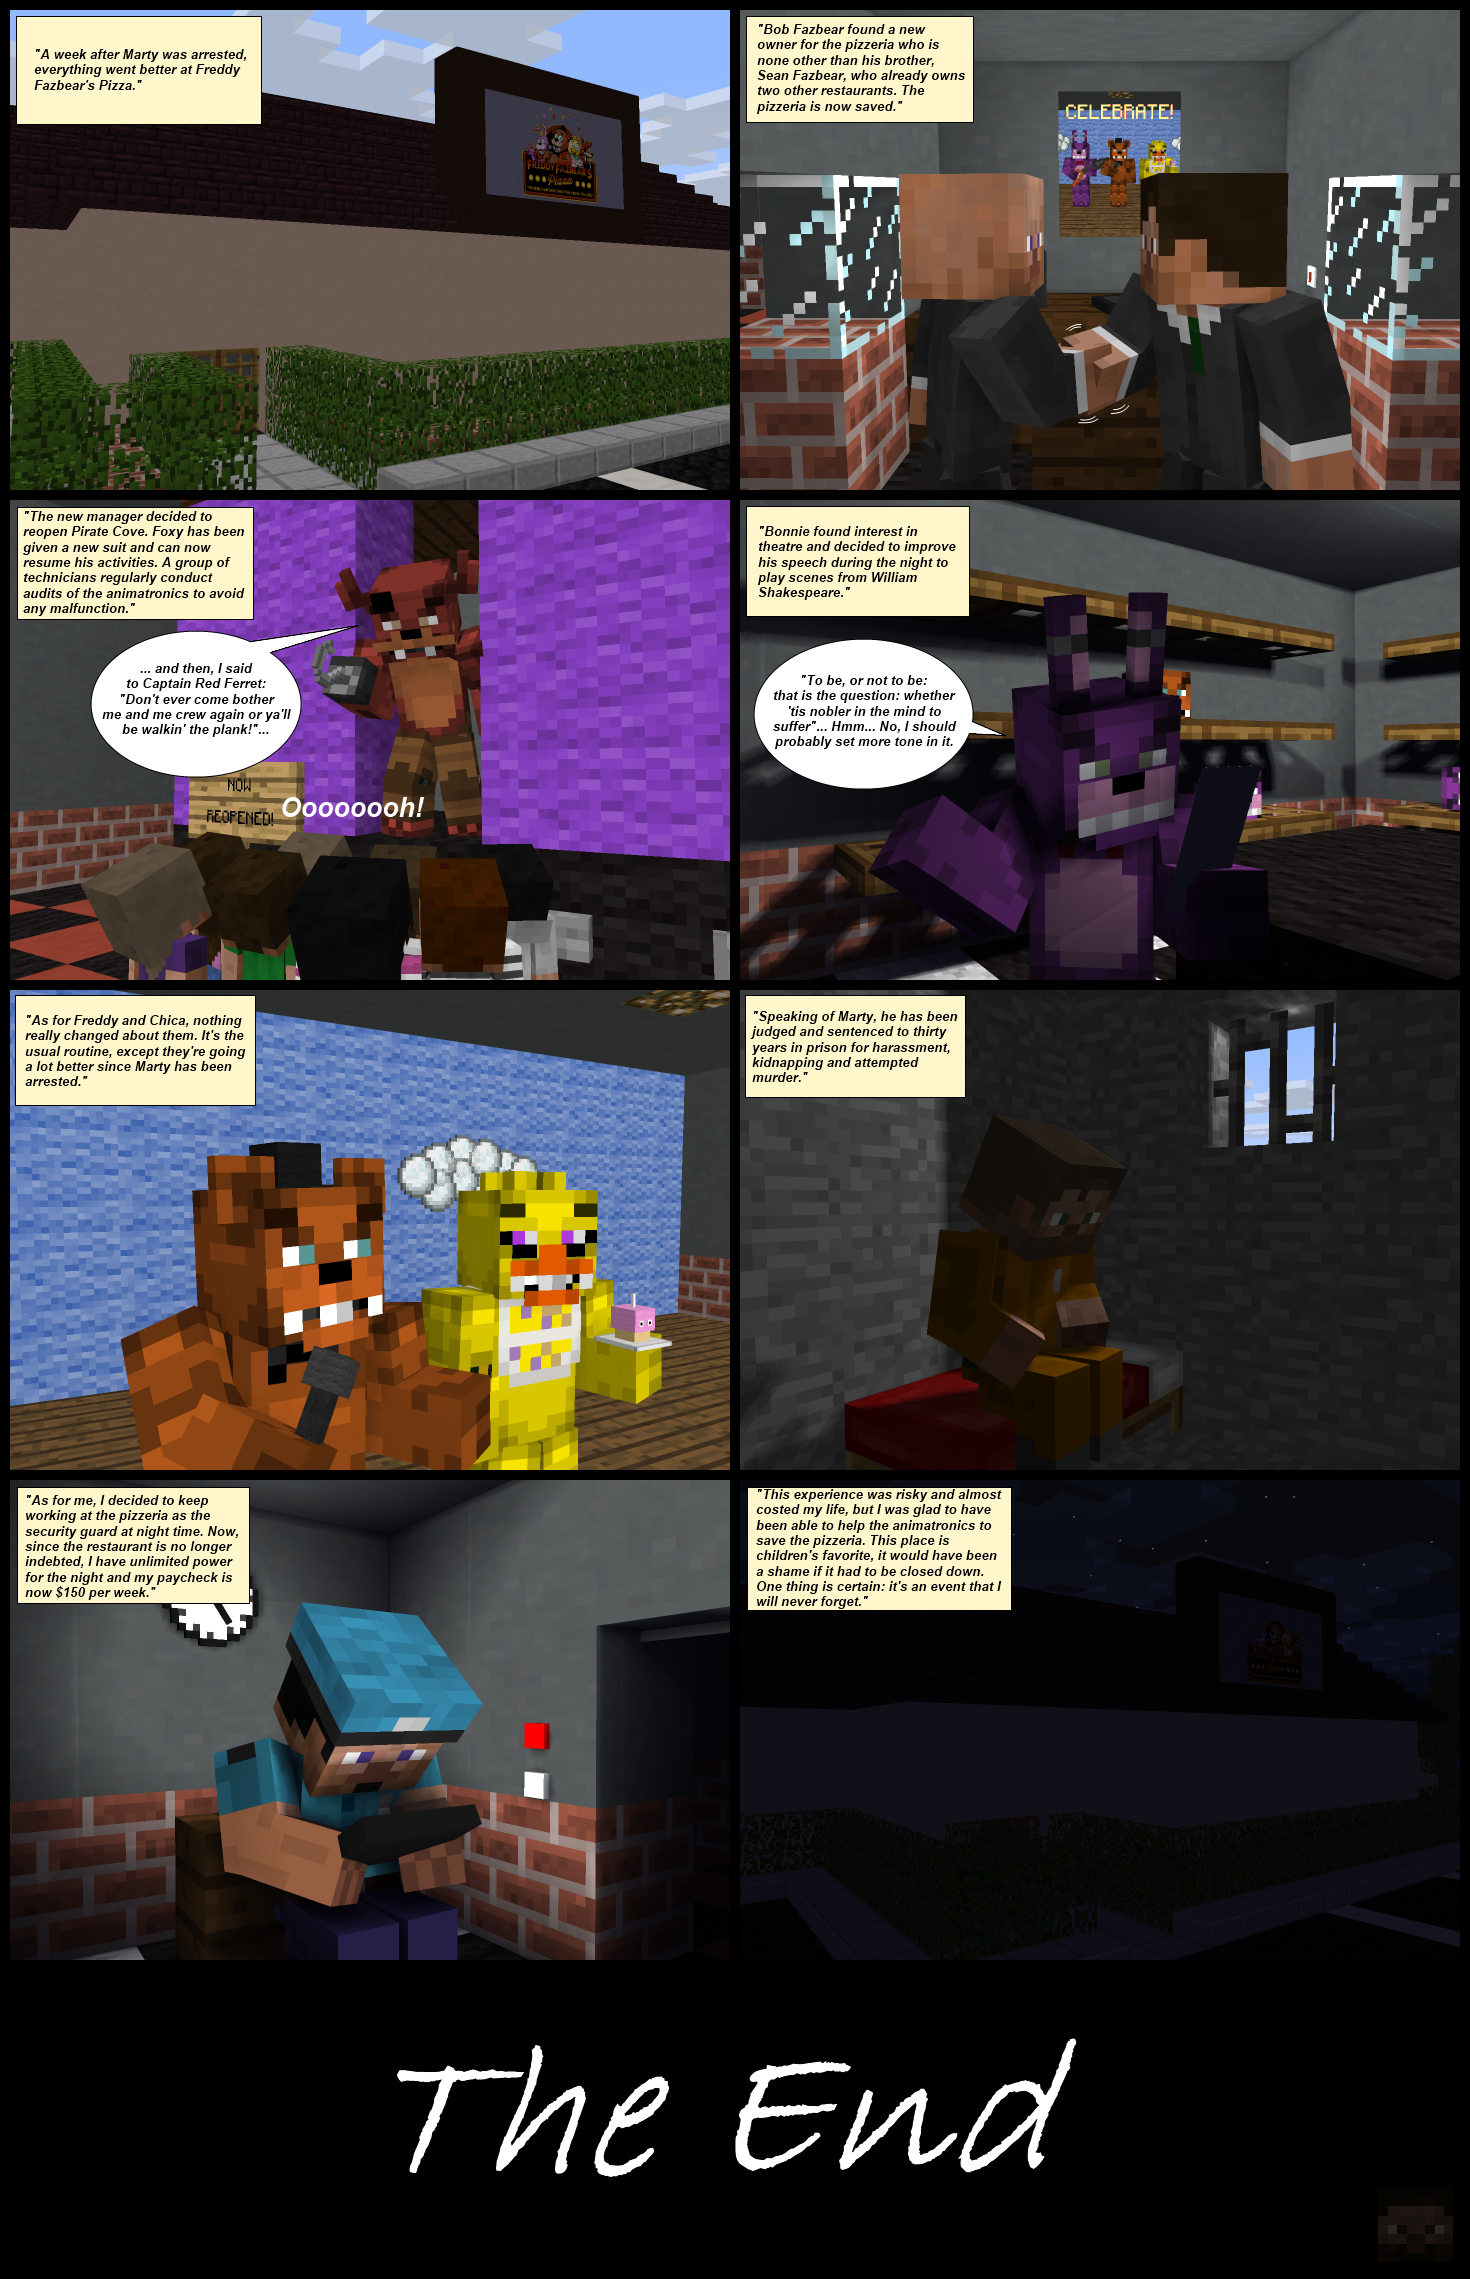 fnaf___page_19_by_fighter33000-d8pgv3e.p